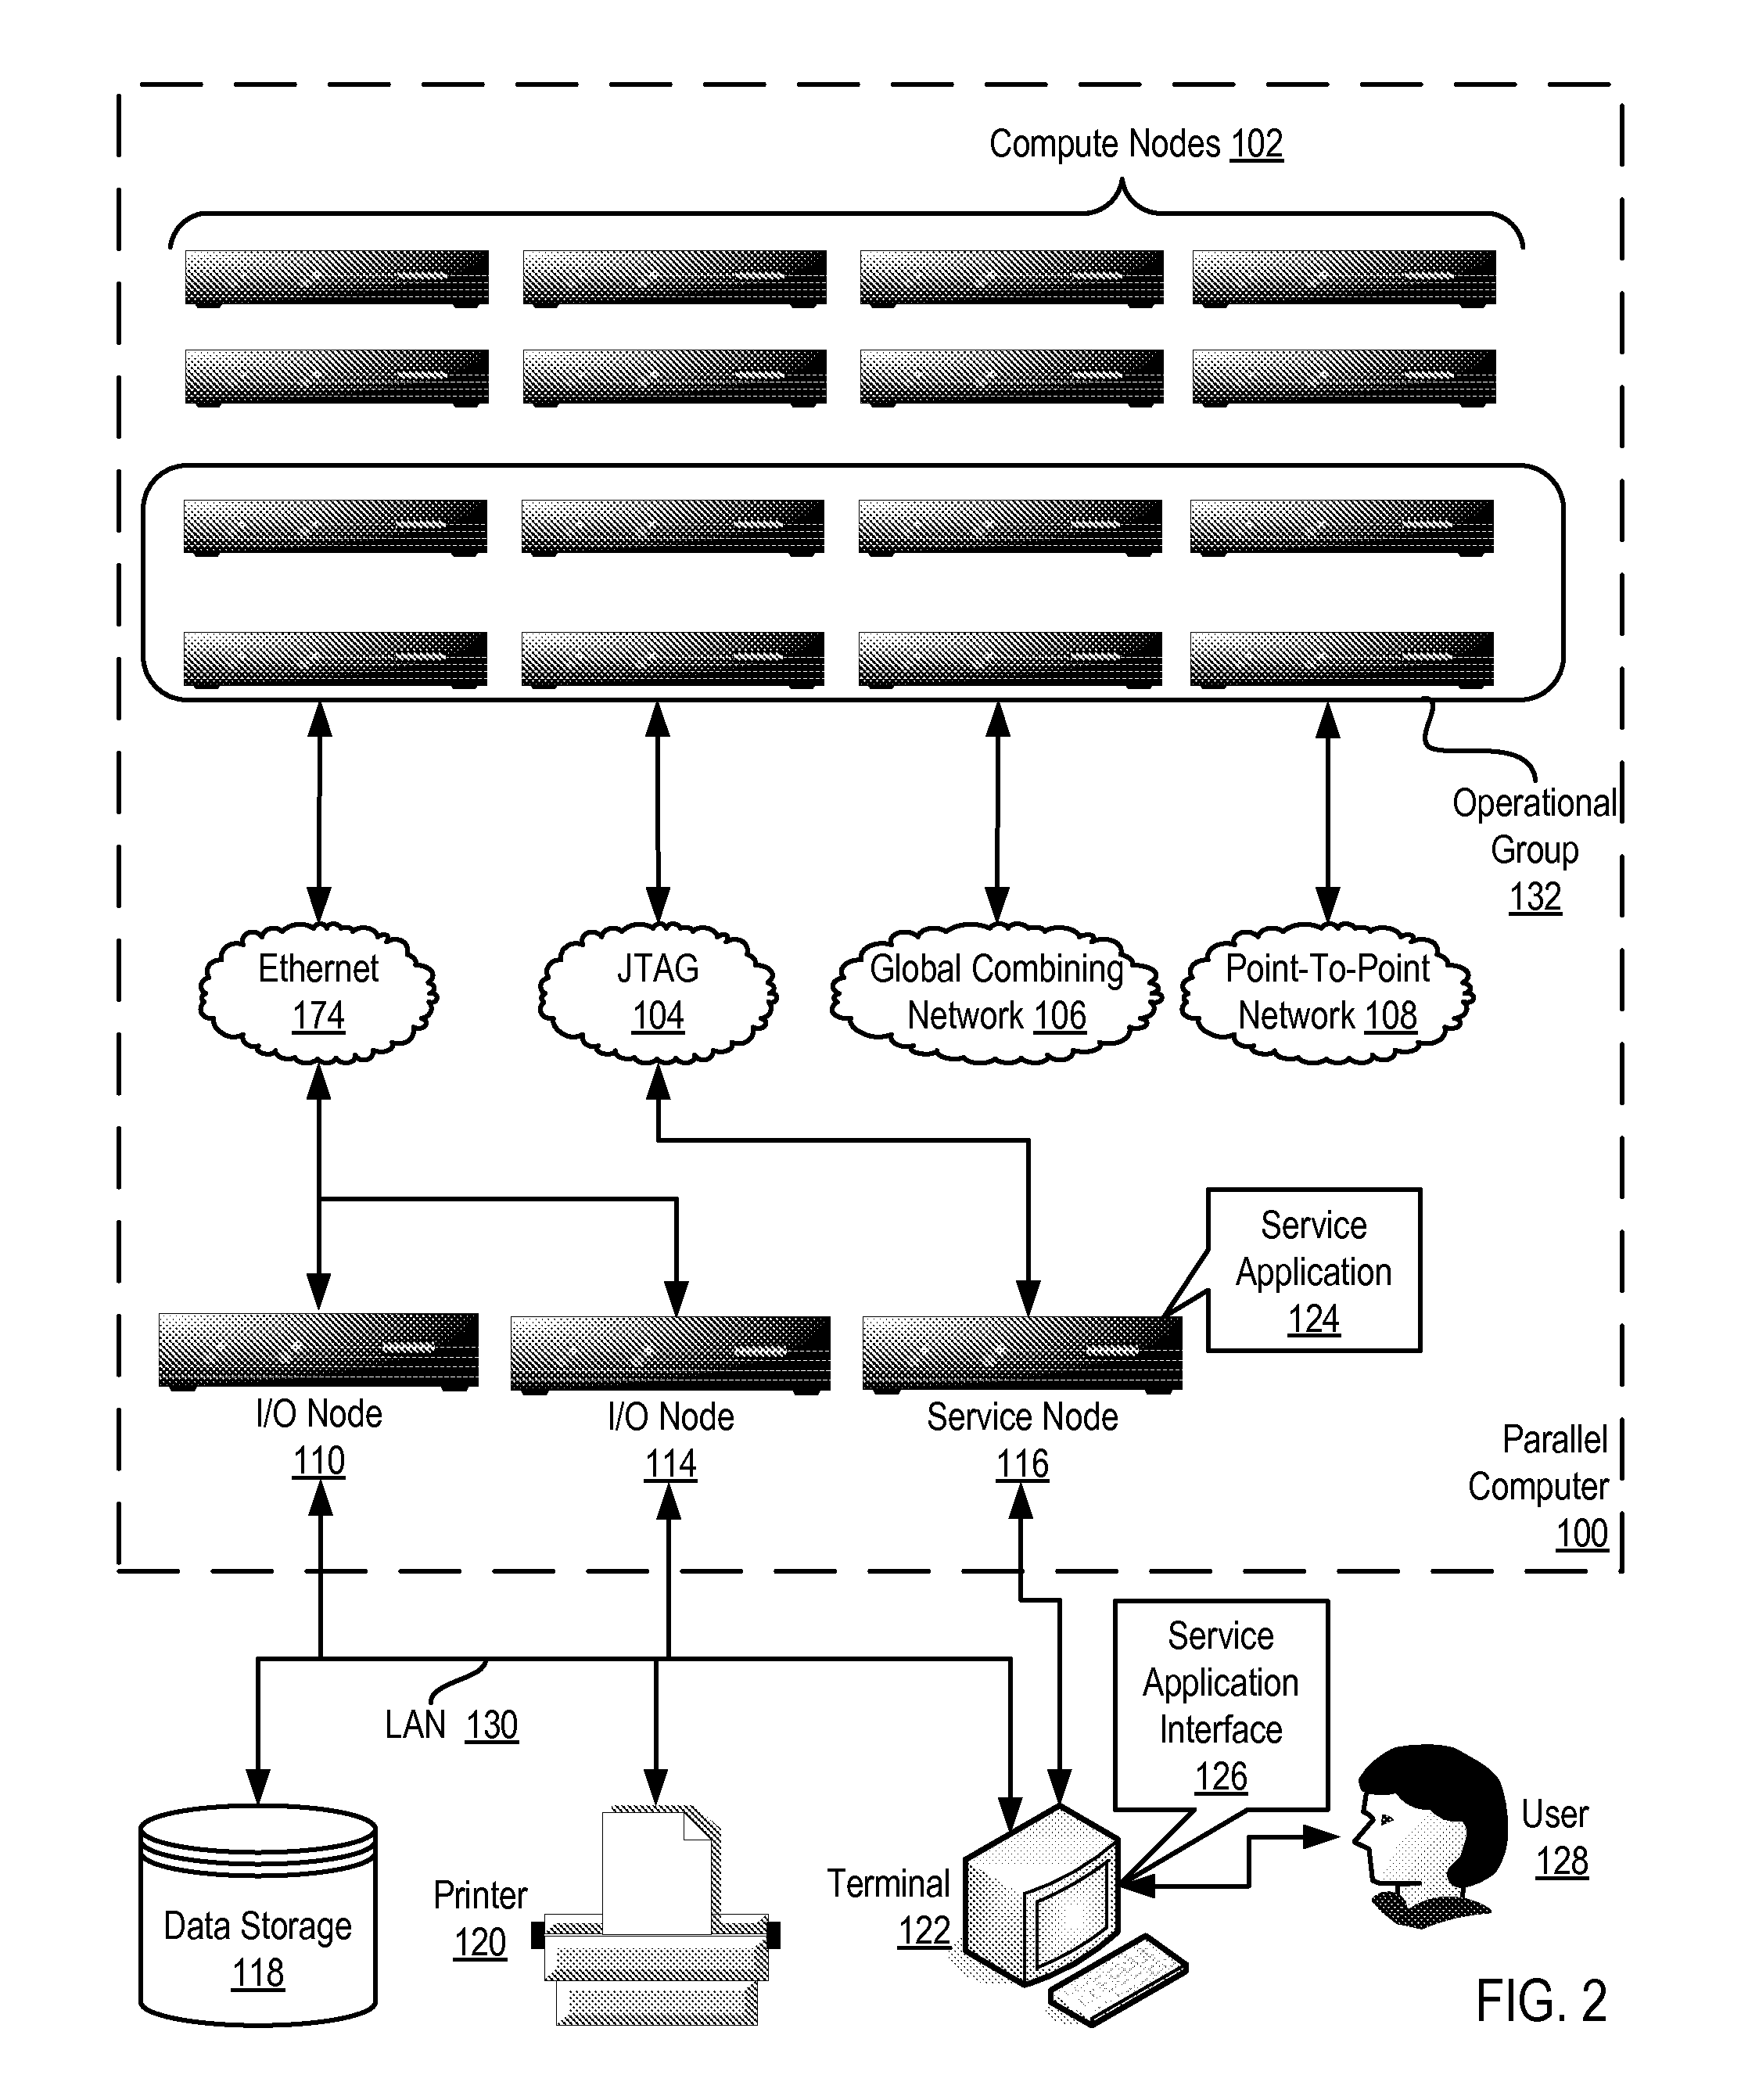 Administering virtual machines in a distributed computing environment